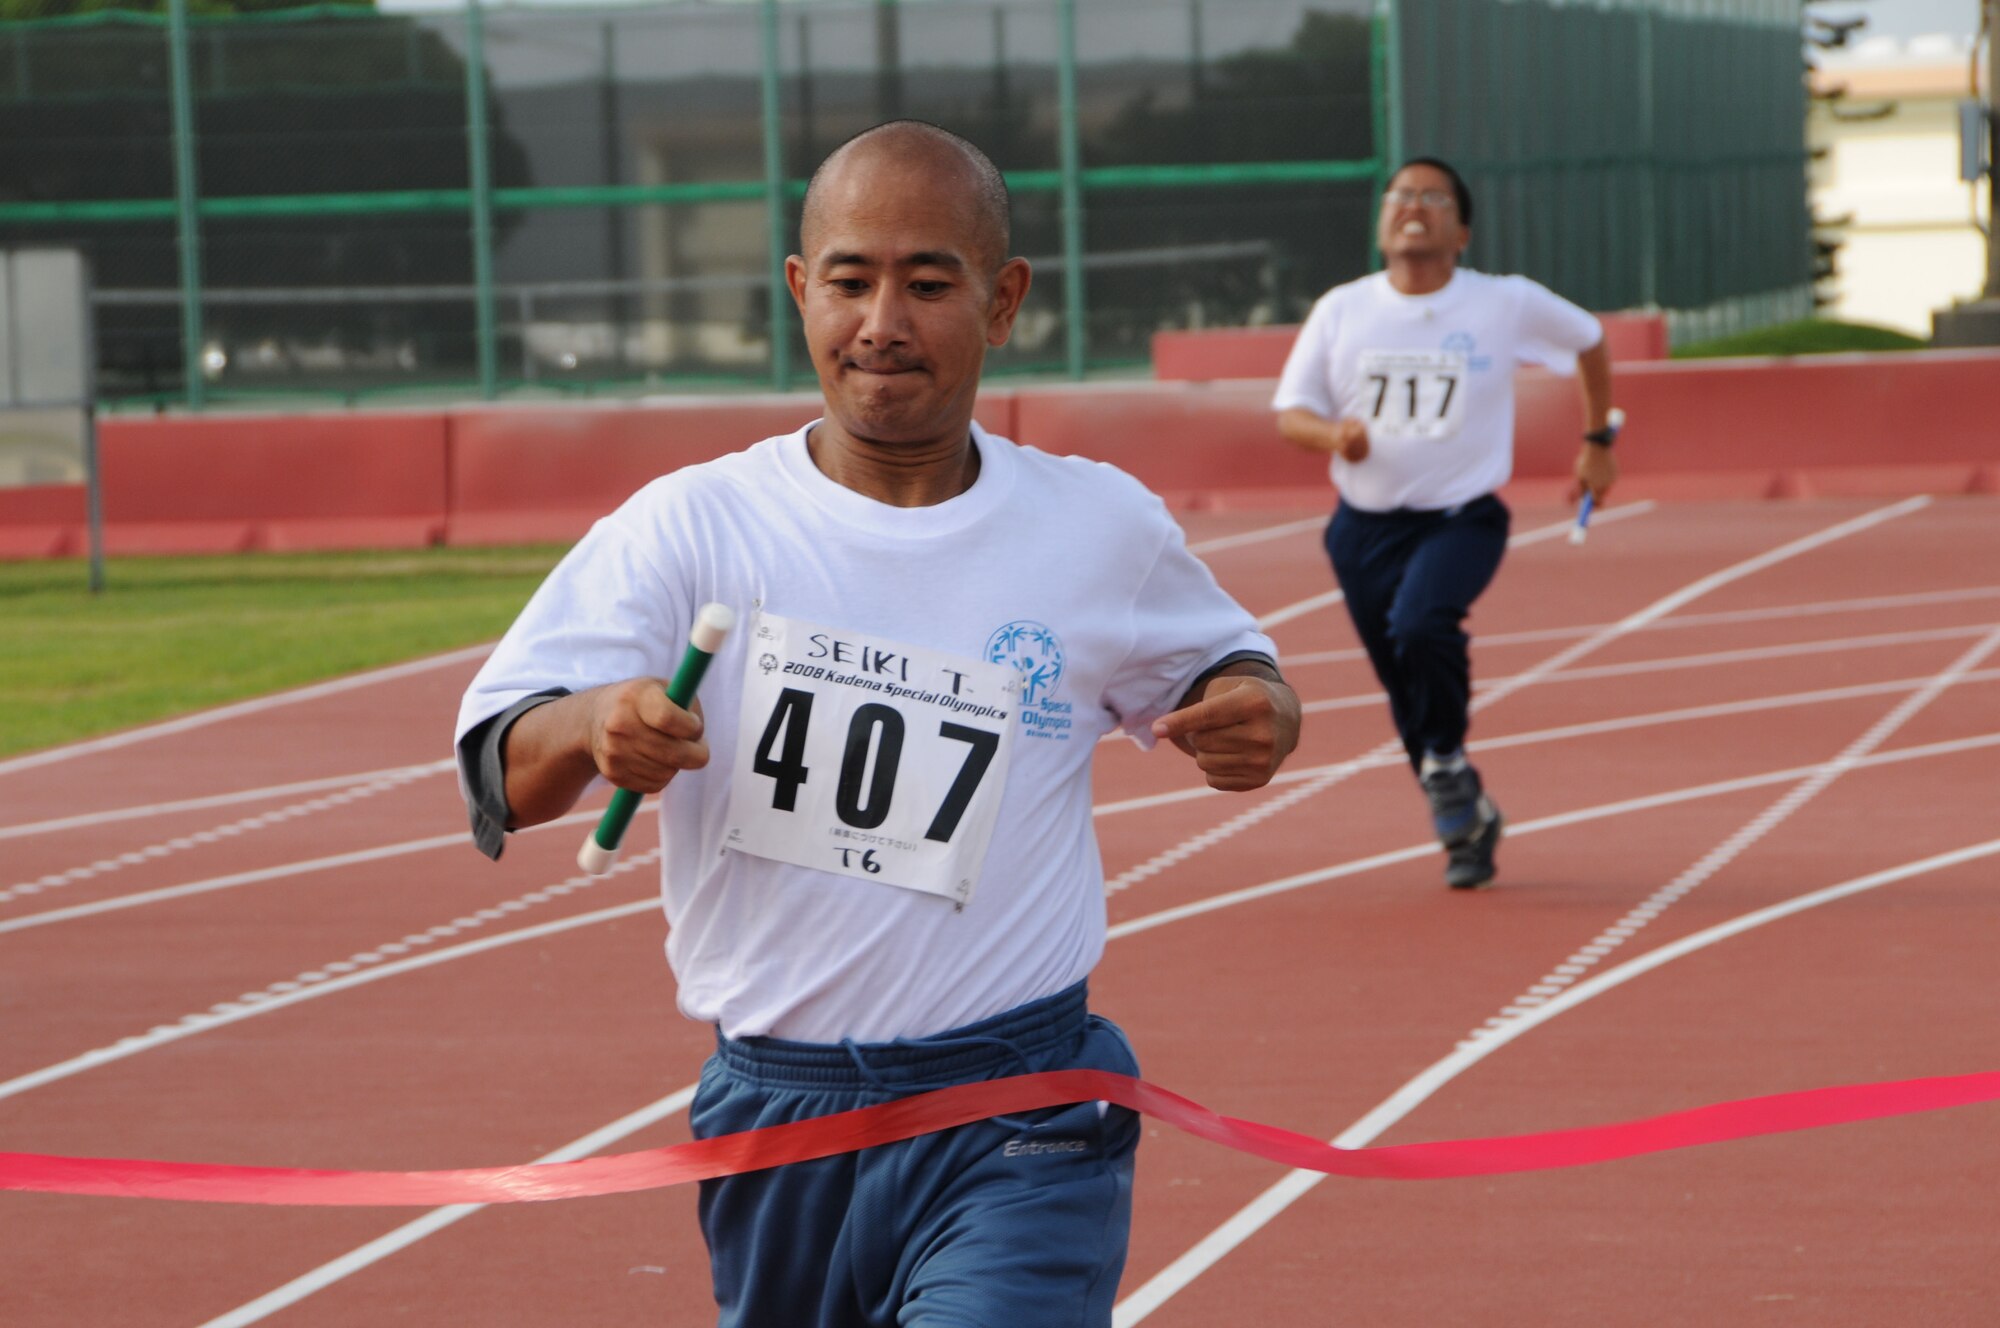 Seiki-san, a participant of the 400 meter relay, crosses the finish line during the 9th Annual Special Olympics hosted by Kadena Air Base, Japan Nov. 8, 2008.   (U.S. Air Force photo/Staff Sgt. Chrissy Best)   
                                             